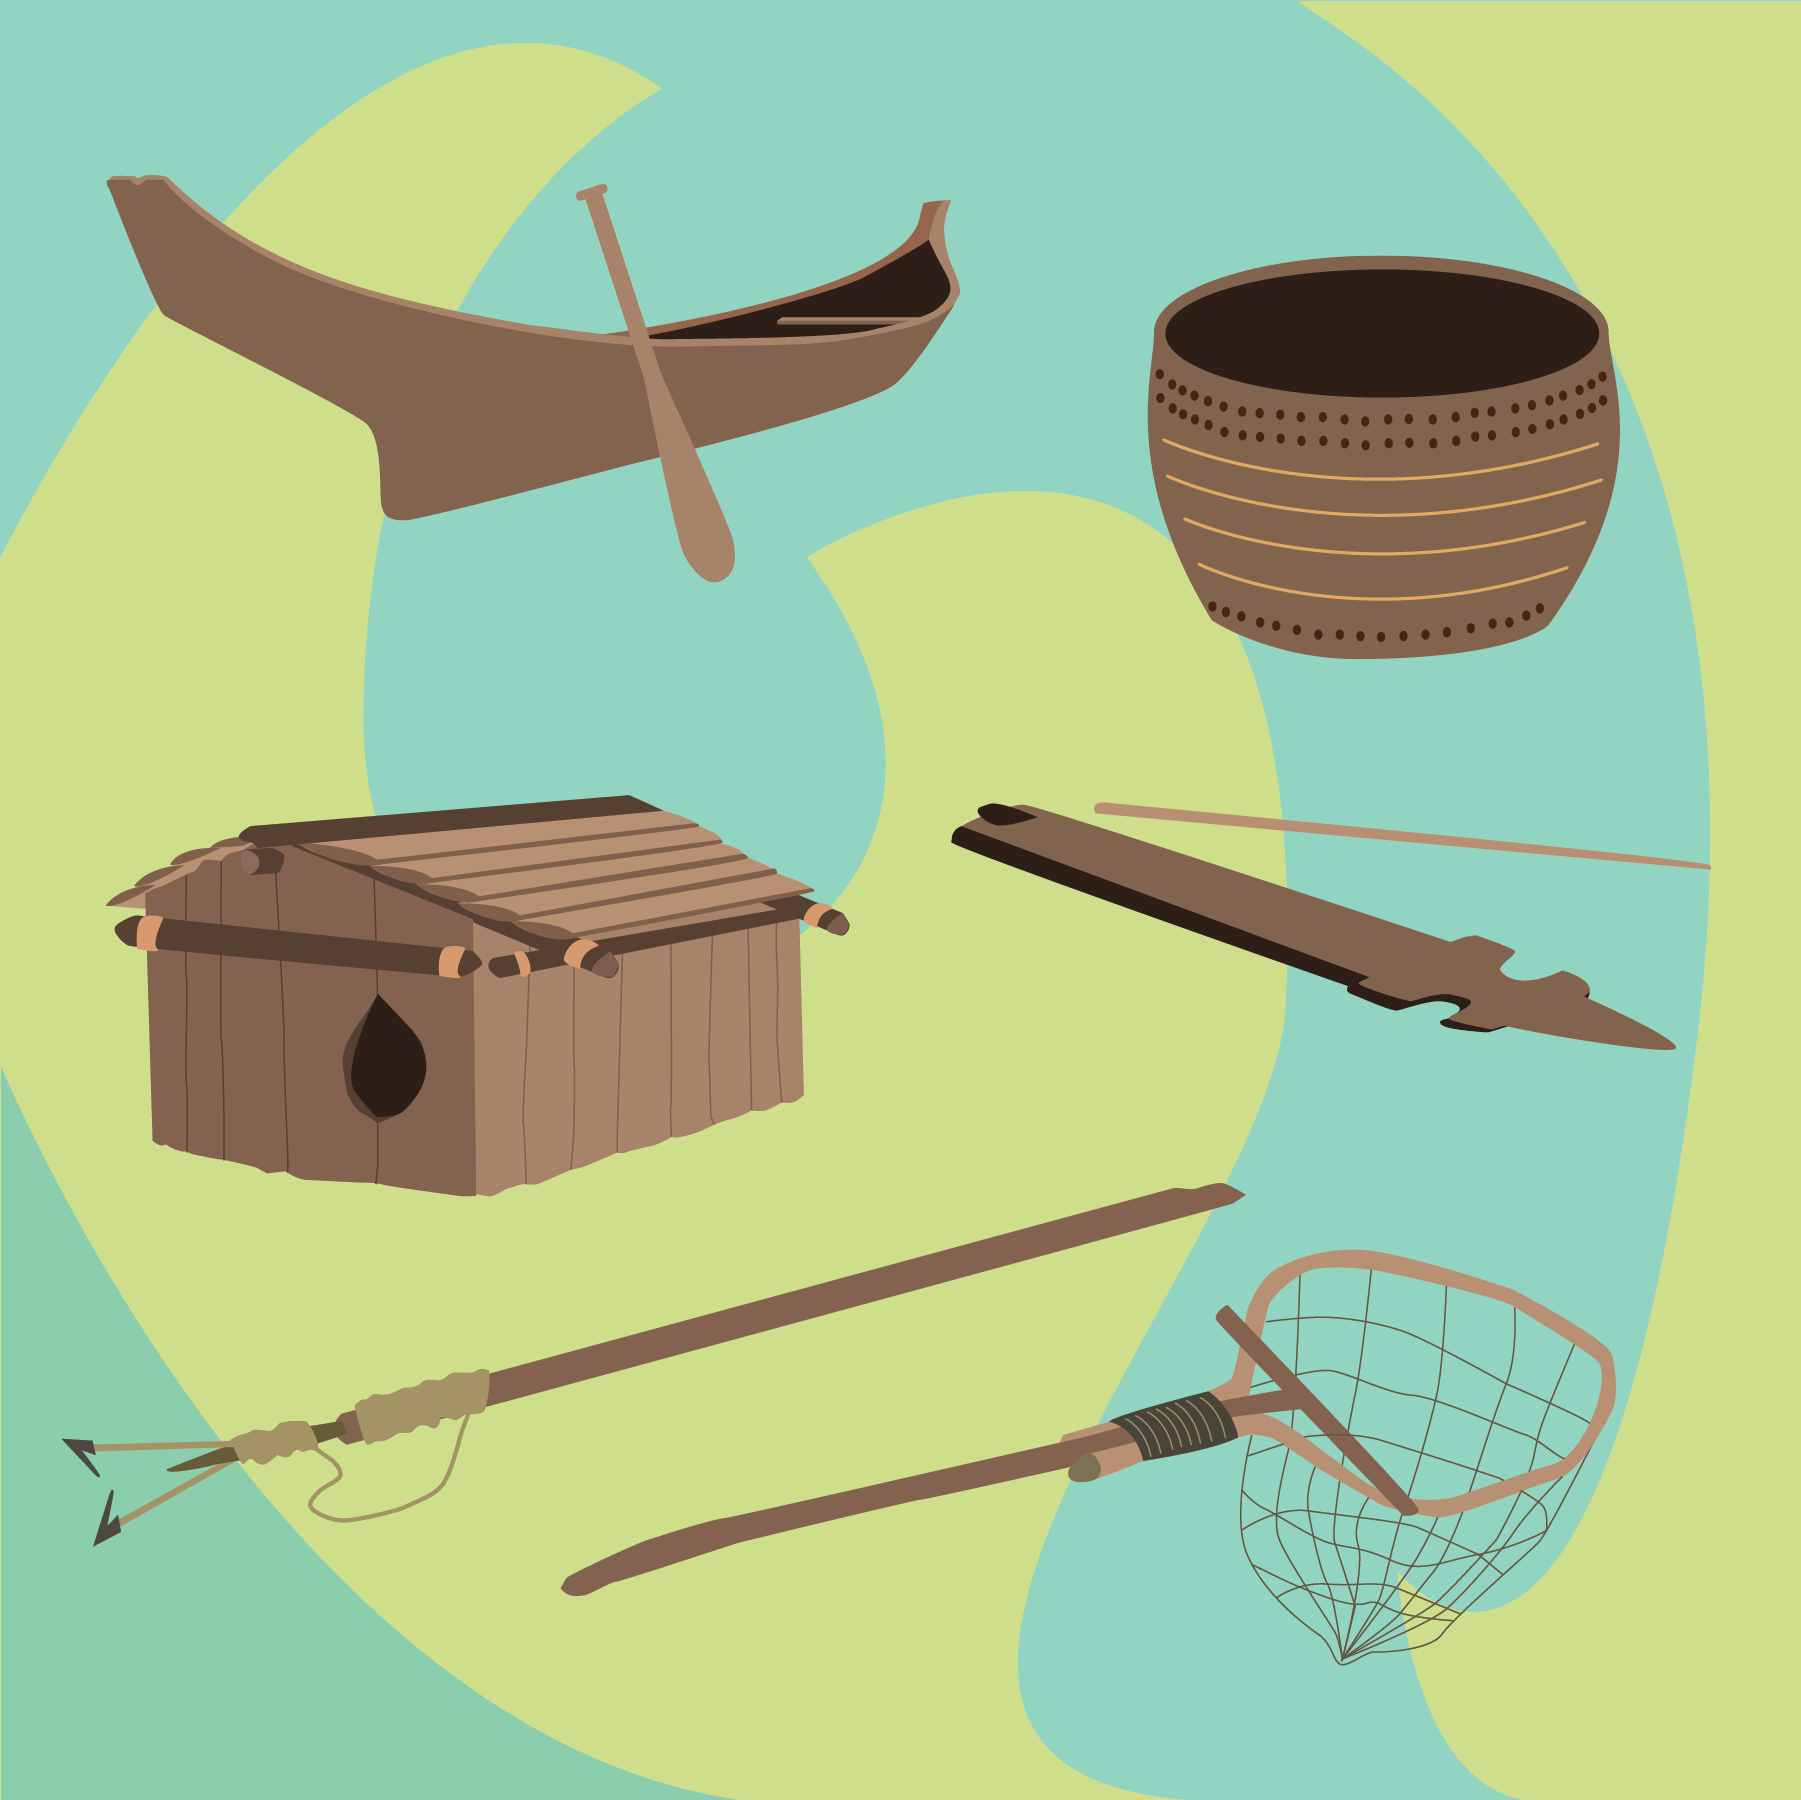 A graphic of several instances of native engineering, including a canoe, an atlatl, a basket, and a fishing net.